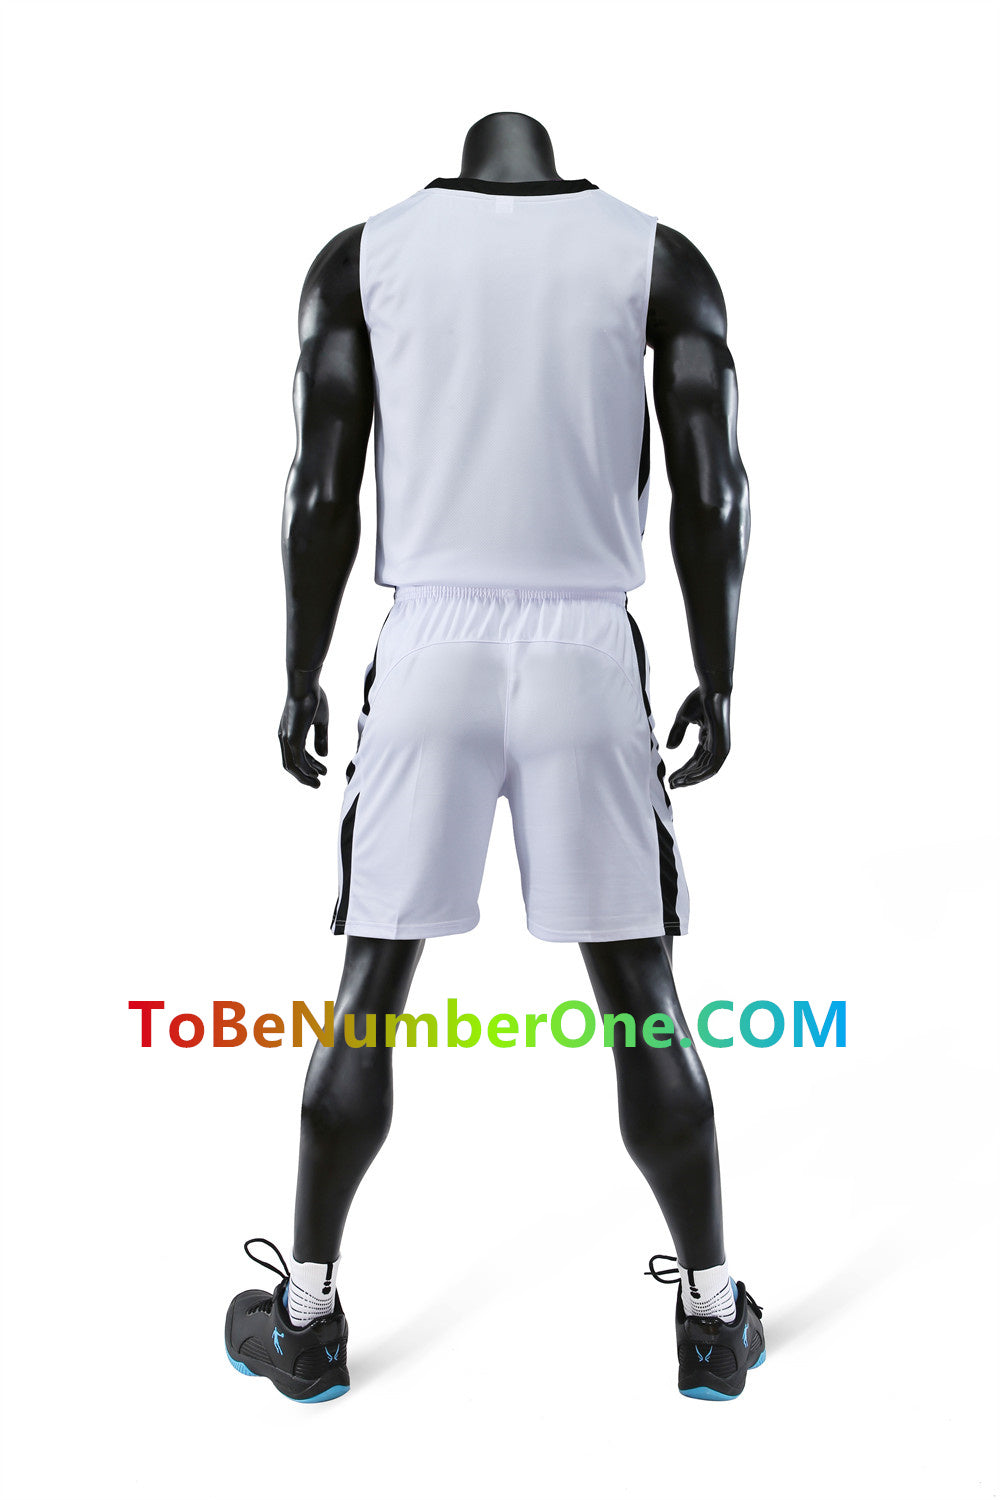 Customize instock High Quality Quick-drying basketball uniforms print with team name , player and number.  jerseys&shorts with pocket 716#